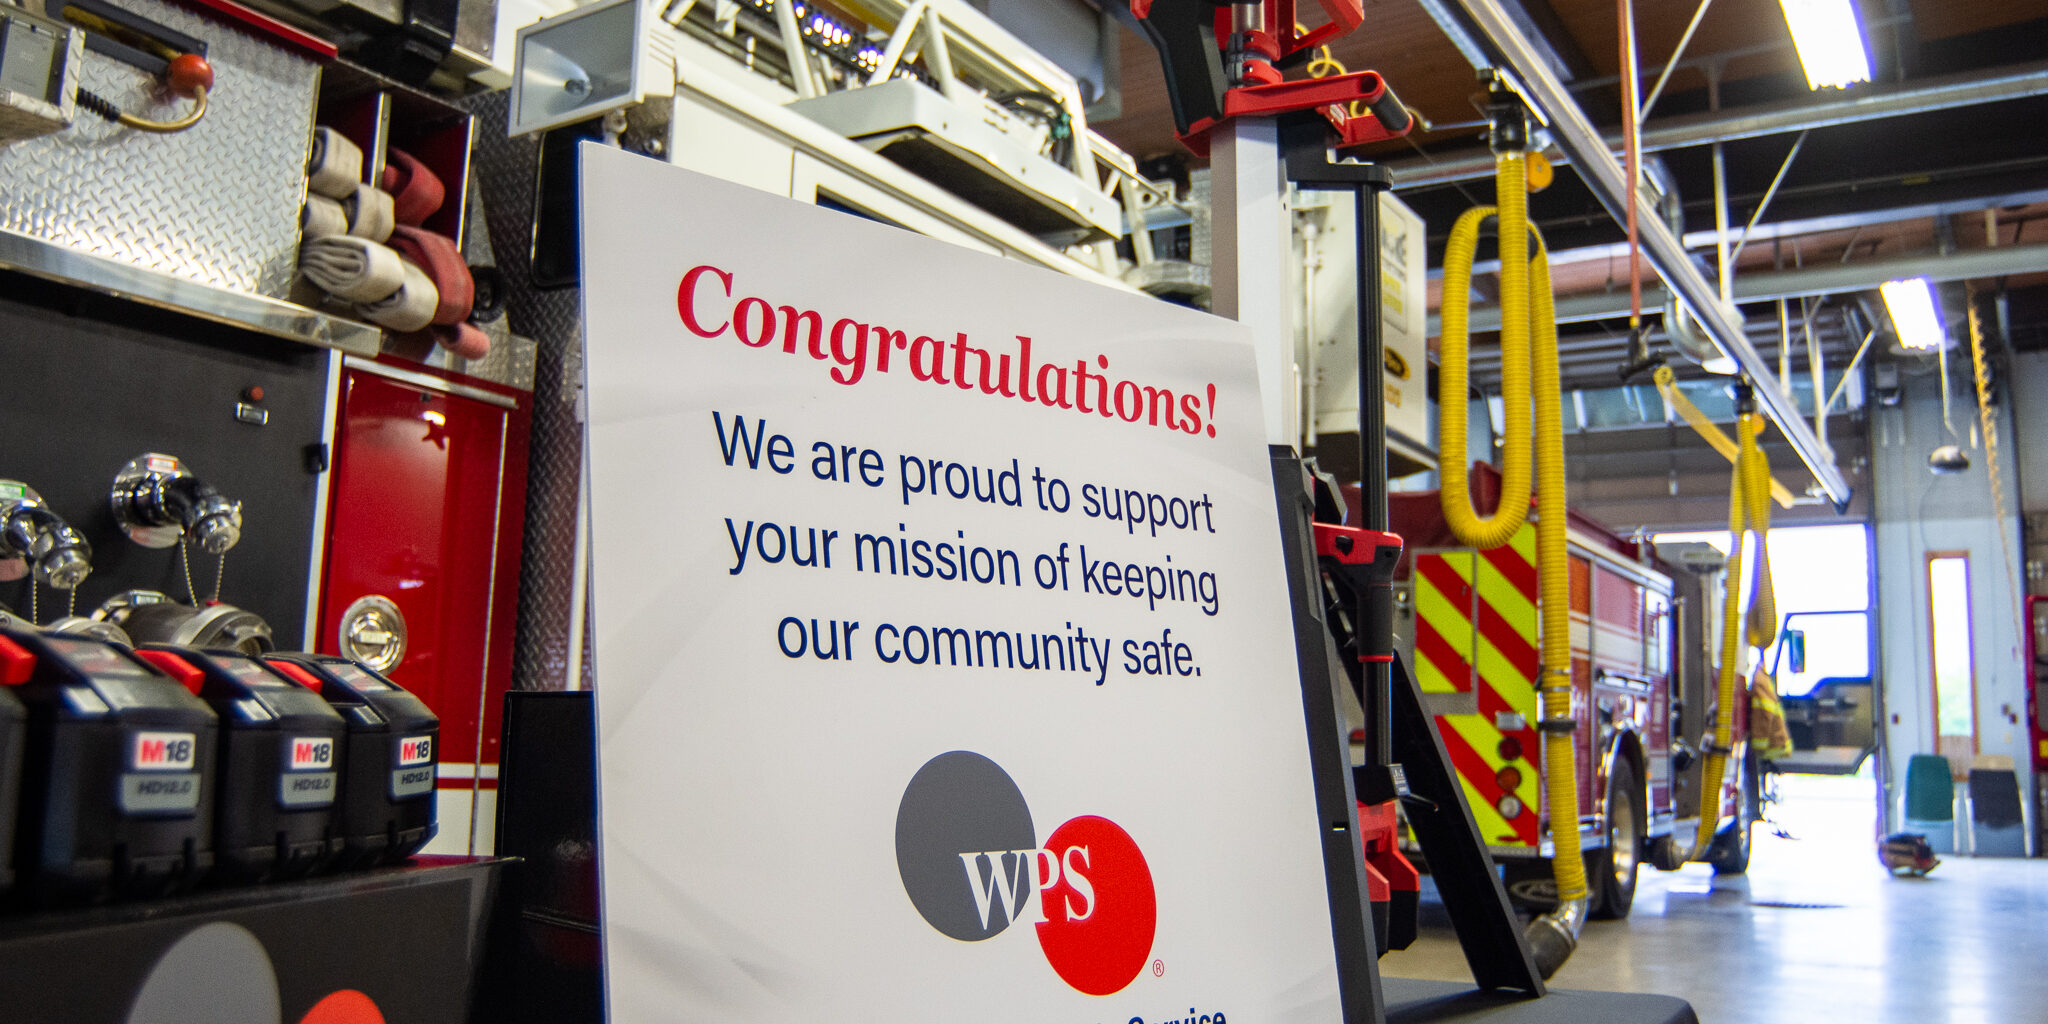 A congratulatory sign displayed next to a red emergency scene light tower inside a fire department garage.